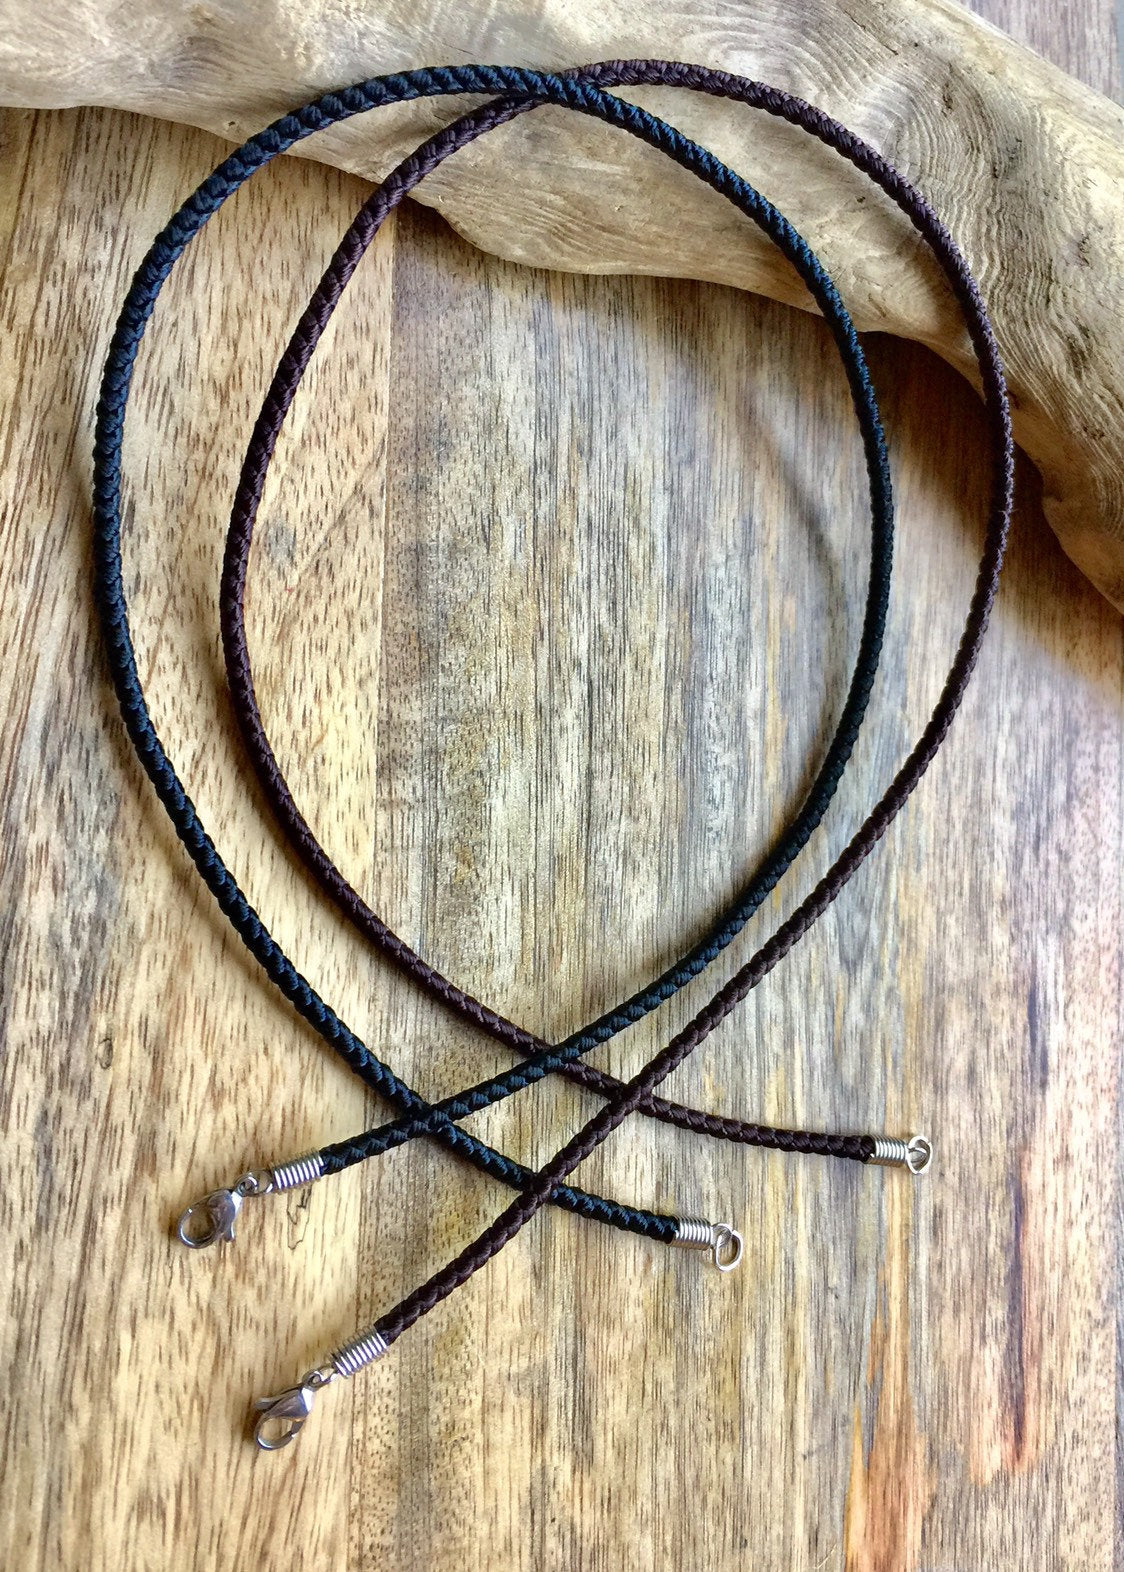 Waterproof Necklace,black Braided Cord Necklace, Mens Black Choker,  Necklace for Pendant, Surfer Choker, Custom Sized Choker, Hypoallergenic 